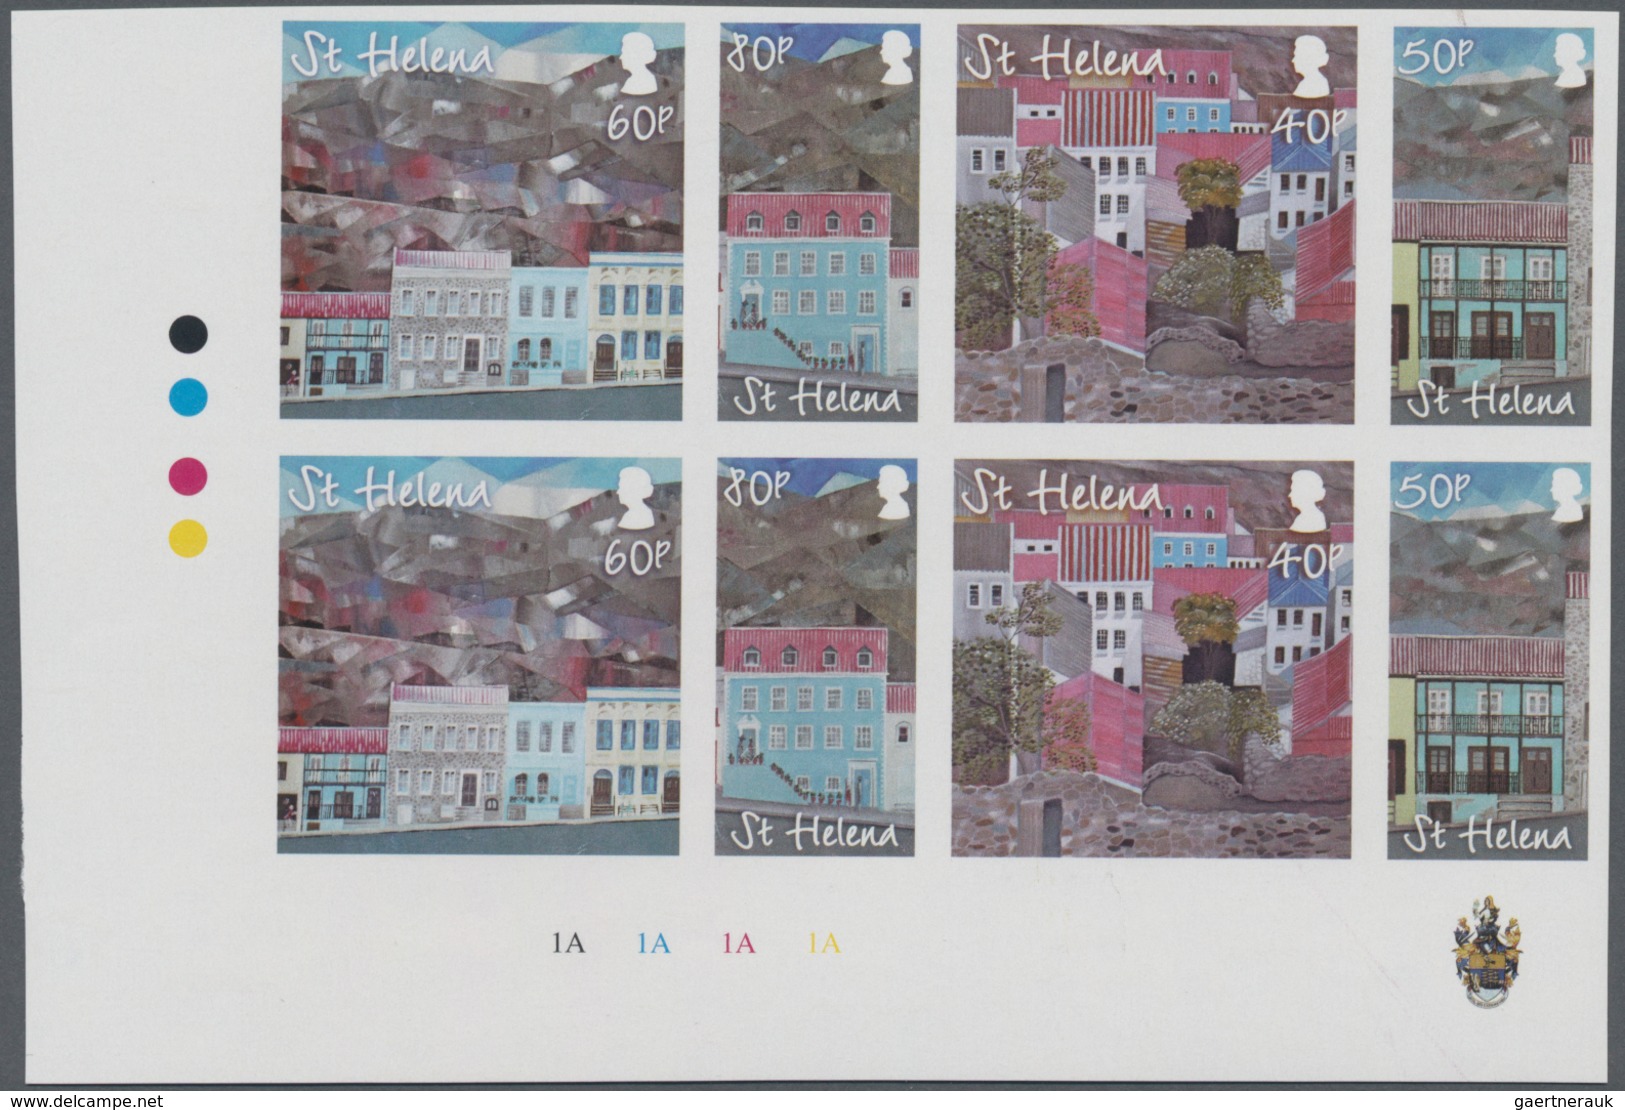 St. Helena: 2015, Jamestown Drawings From Housed In The Main Street Complete Set Of Four In Horizont - Saint Helena Island